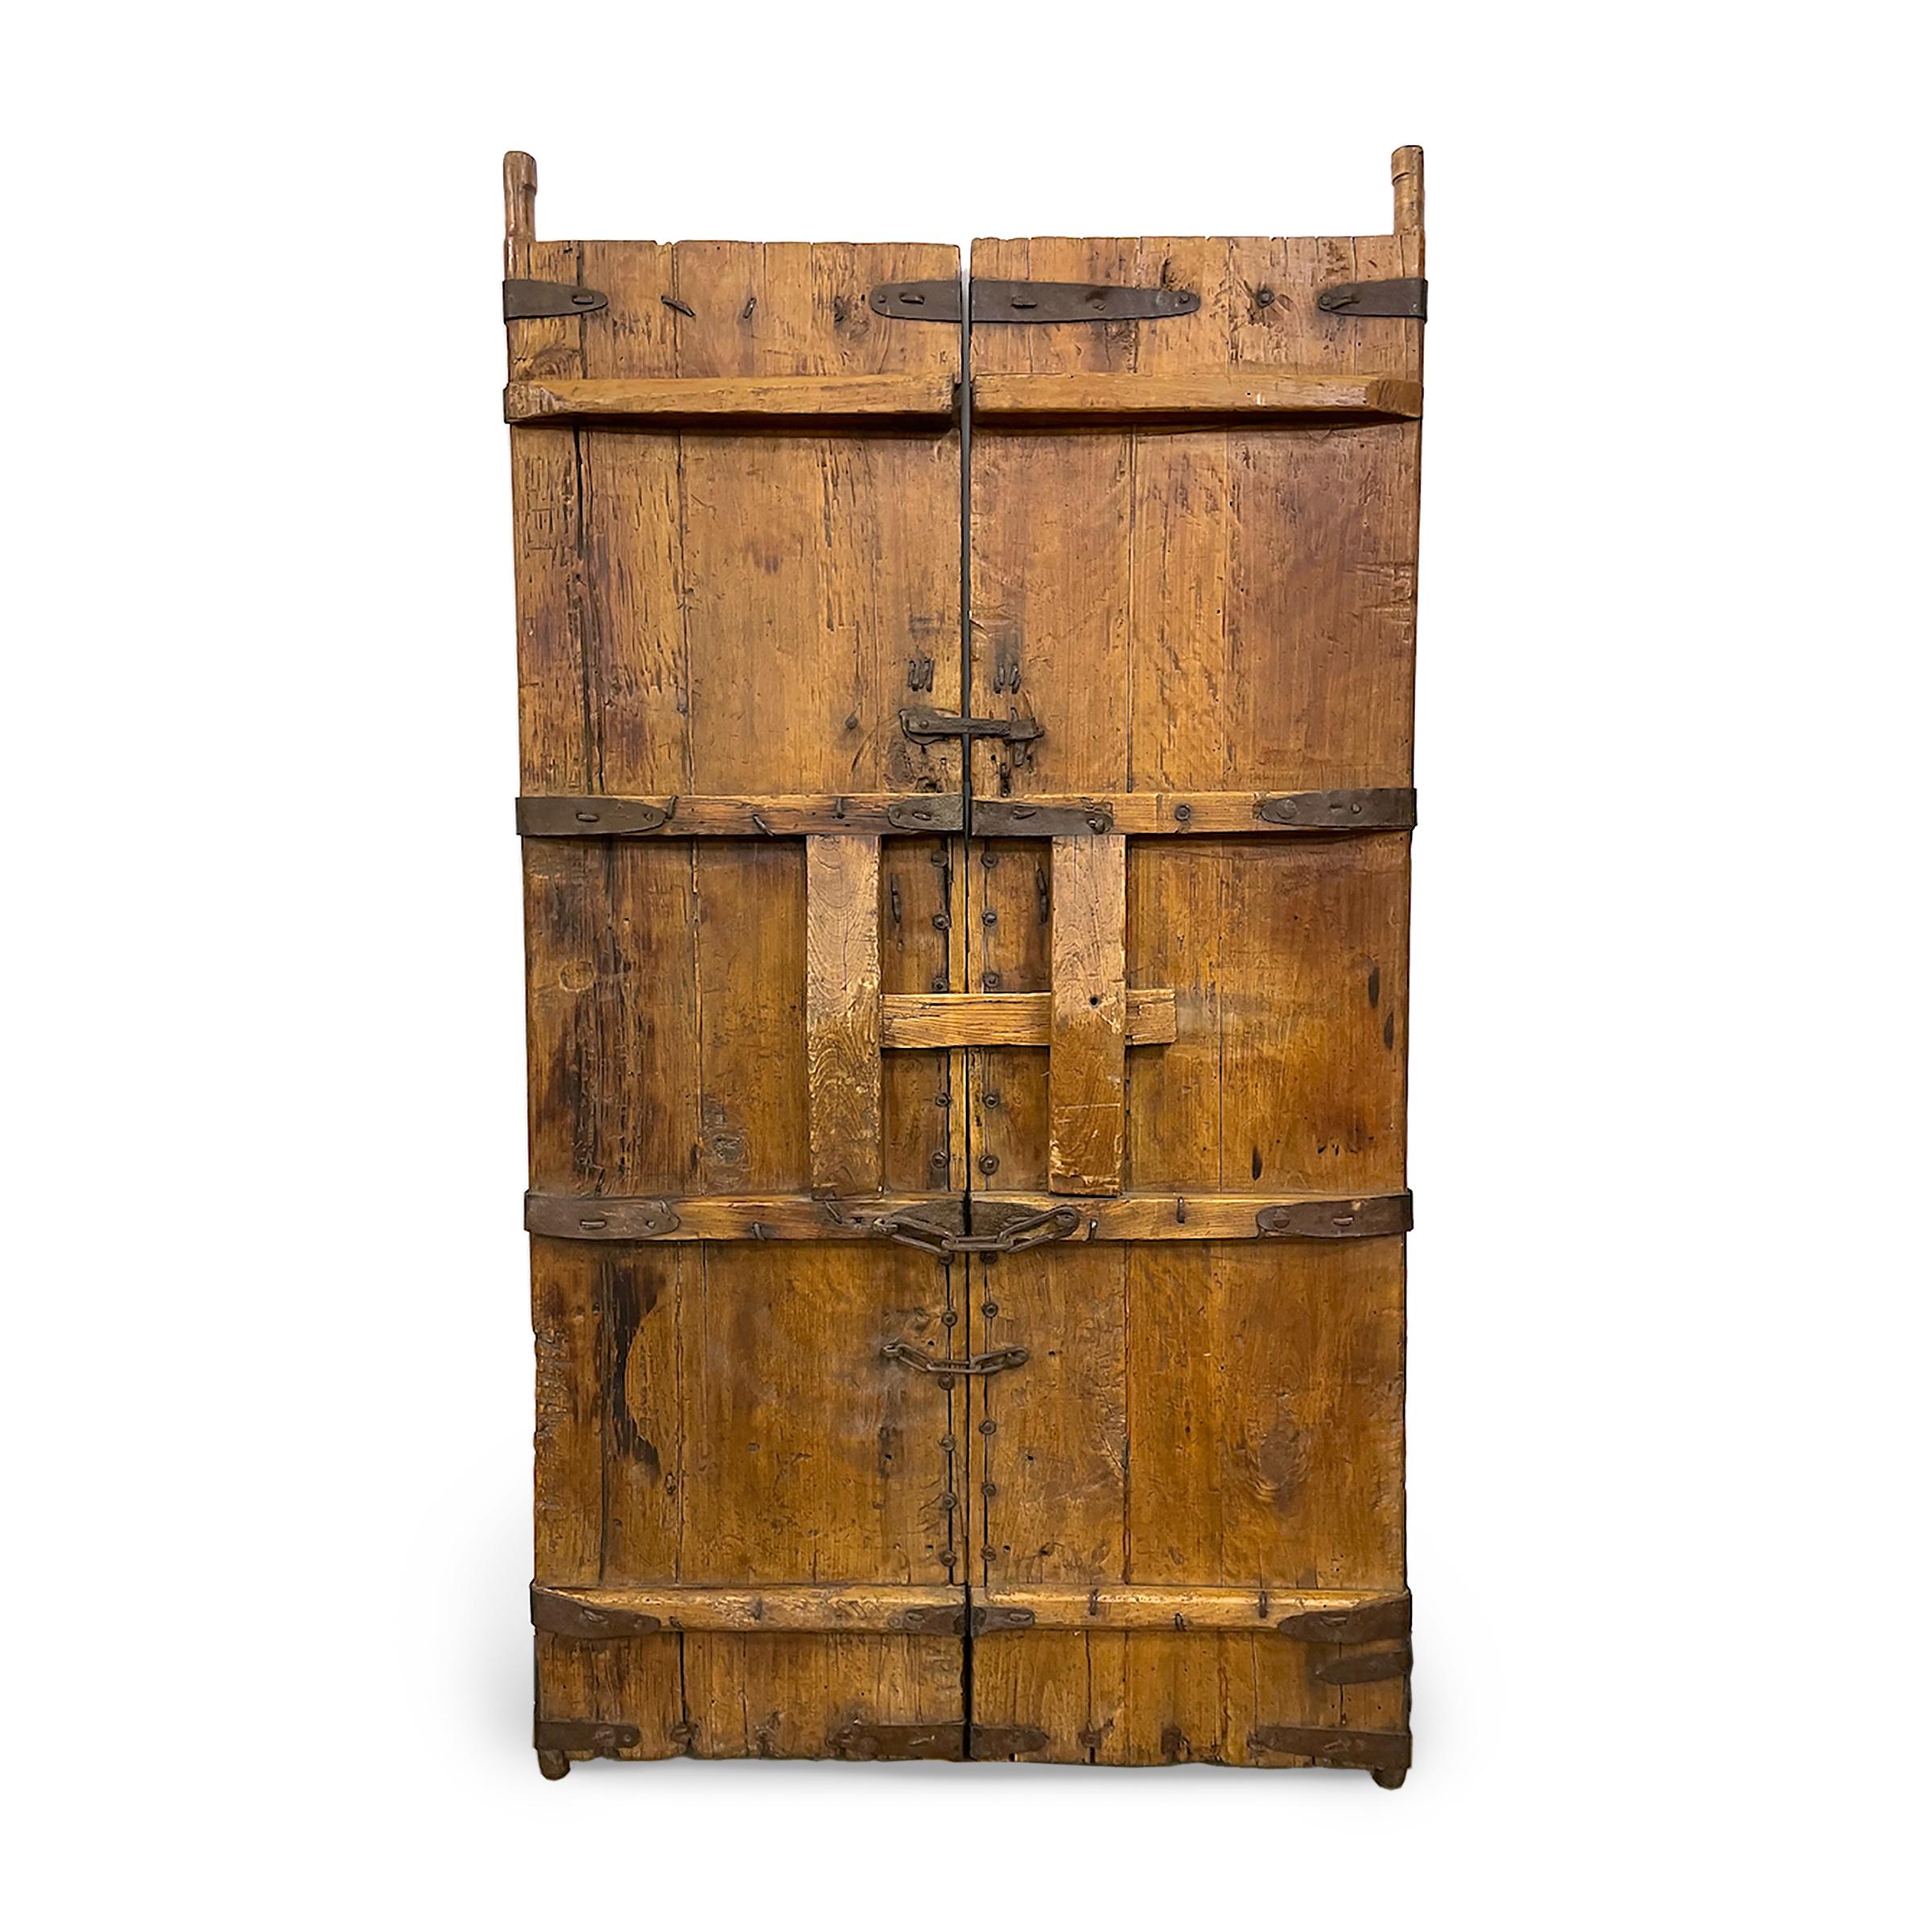 Pair of Chinese Iron Bound Courtyard Doors with Frame, c. 1850 For Sale 1